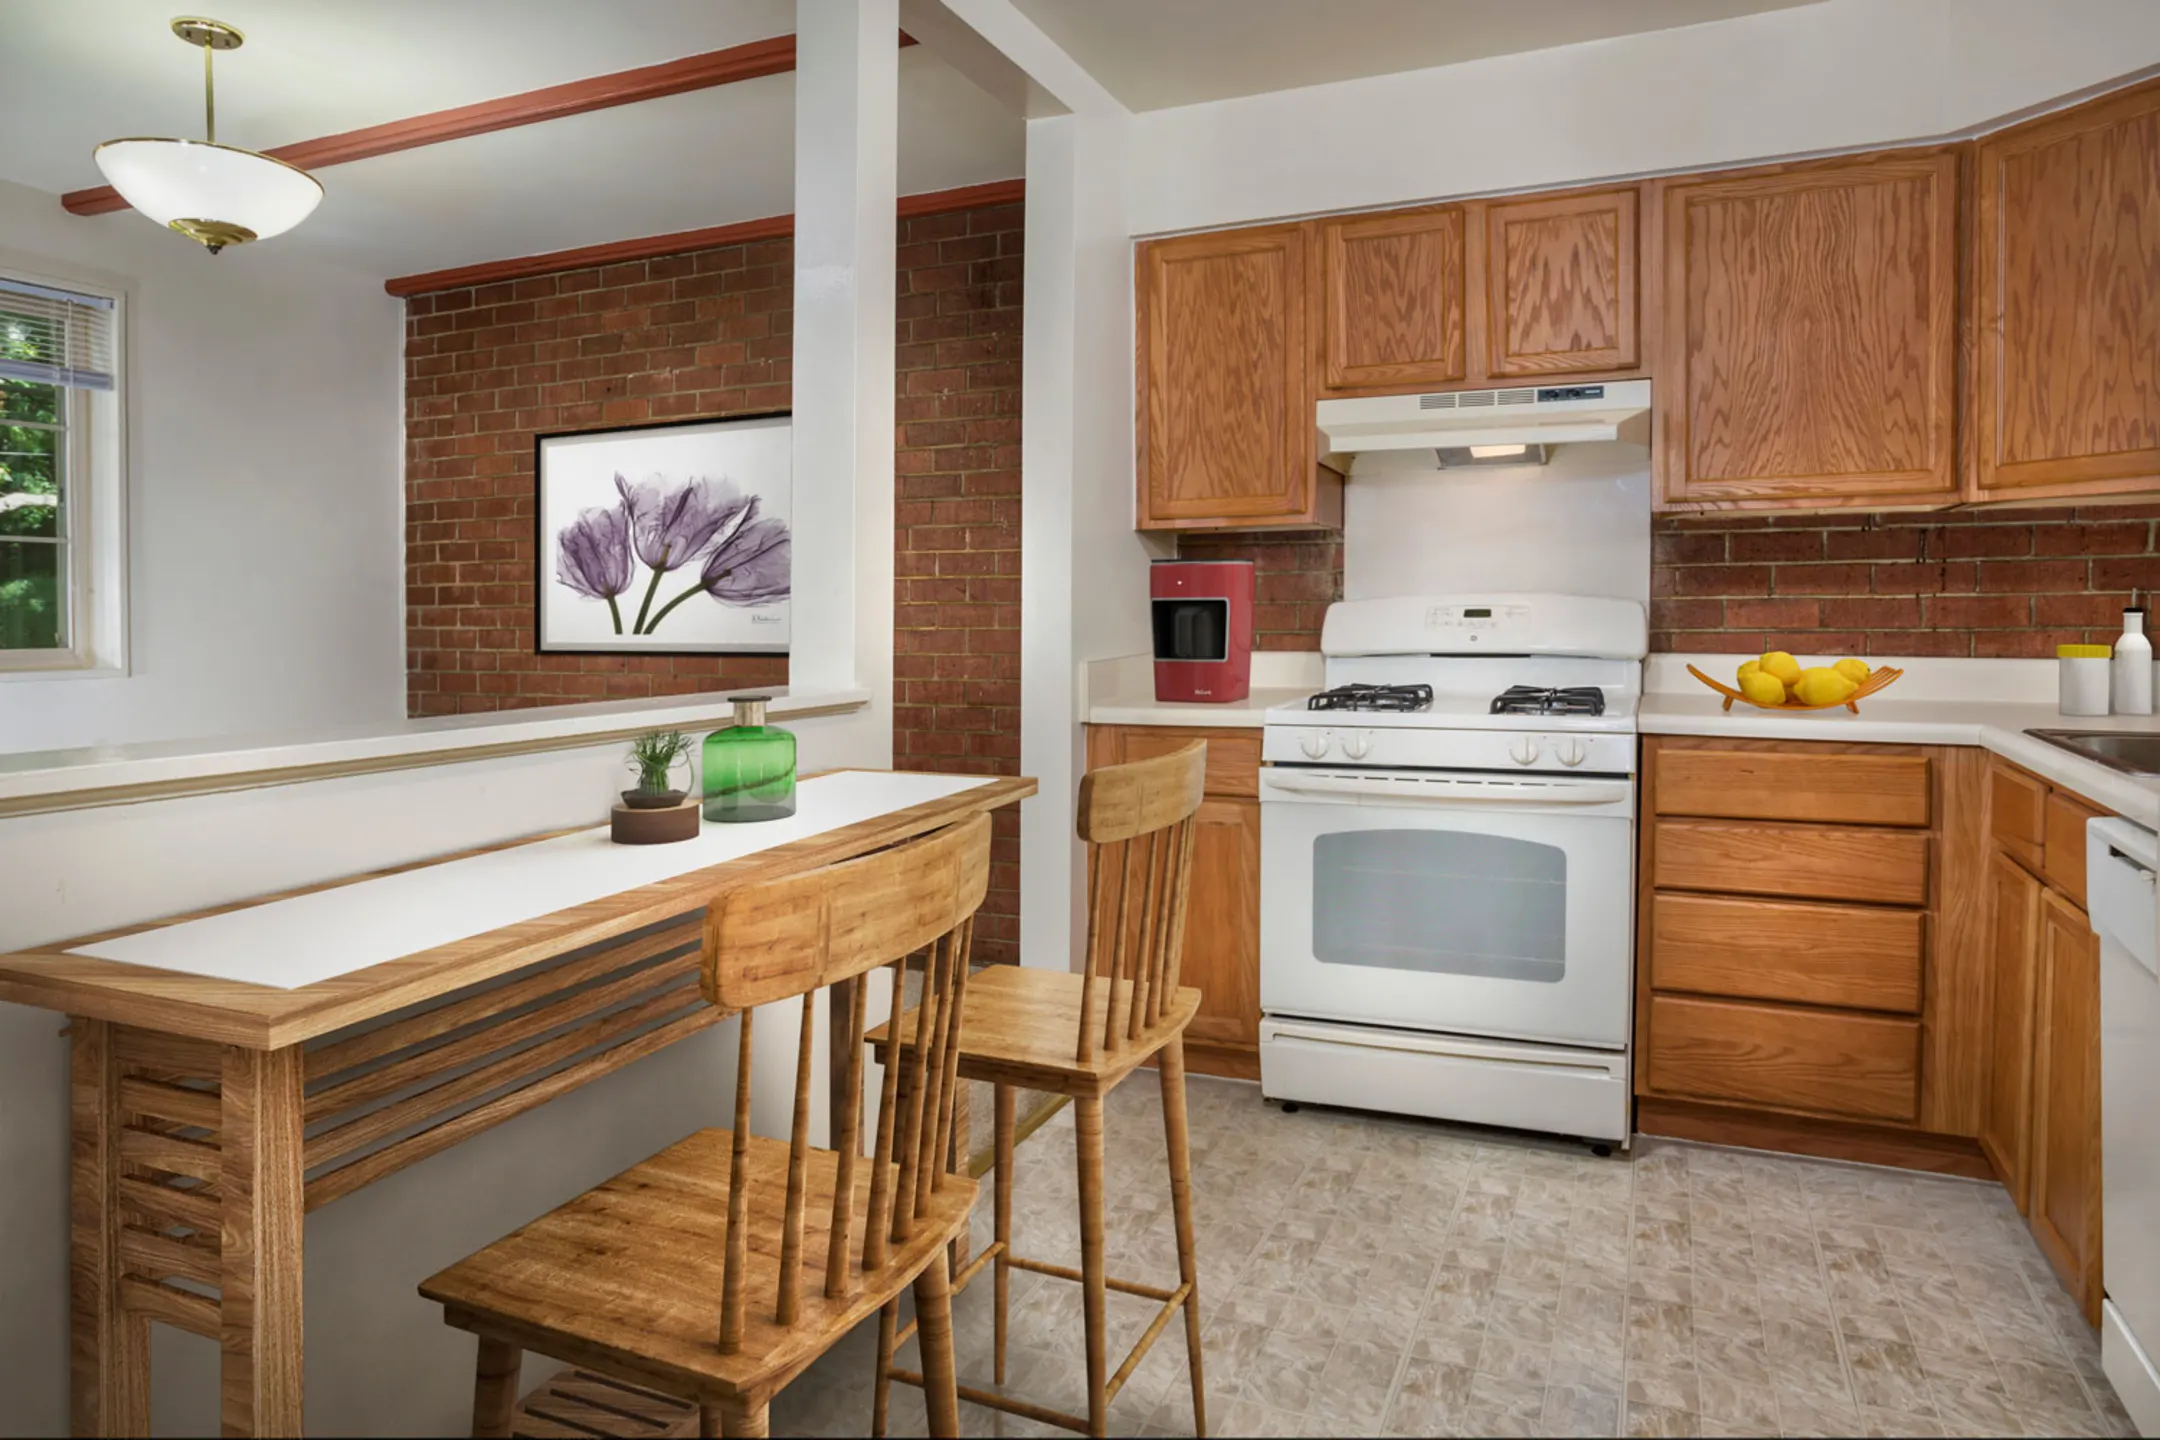 Kitchen - Whitehall Square - Suitland, MD